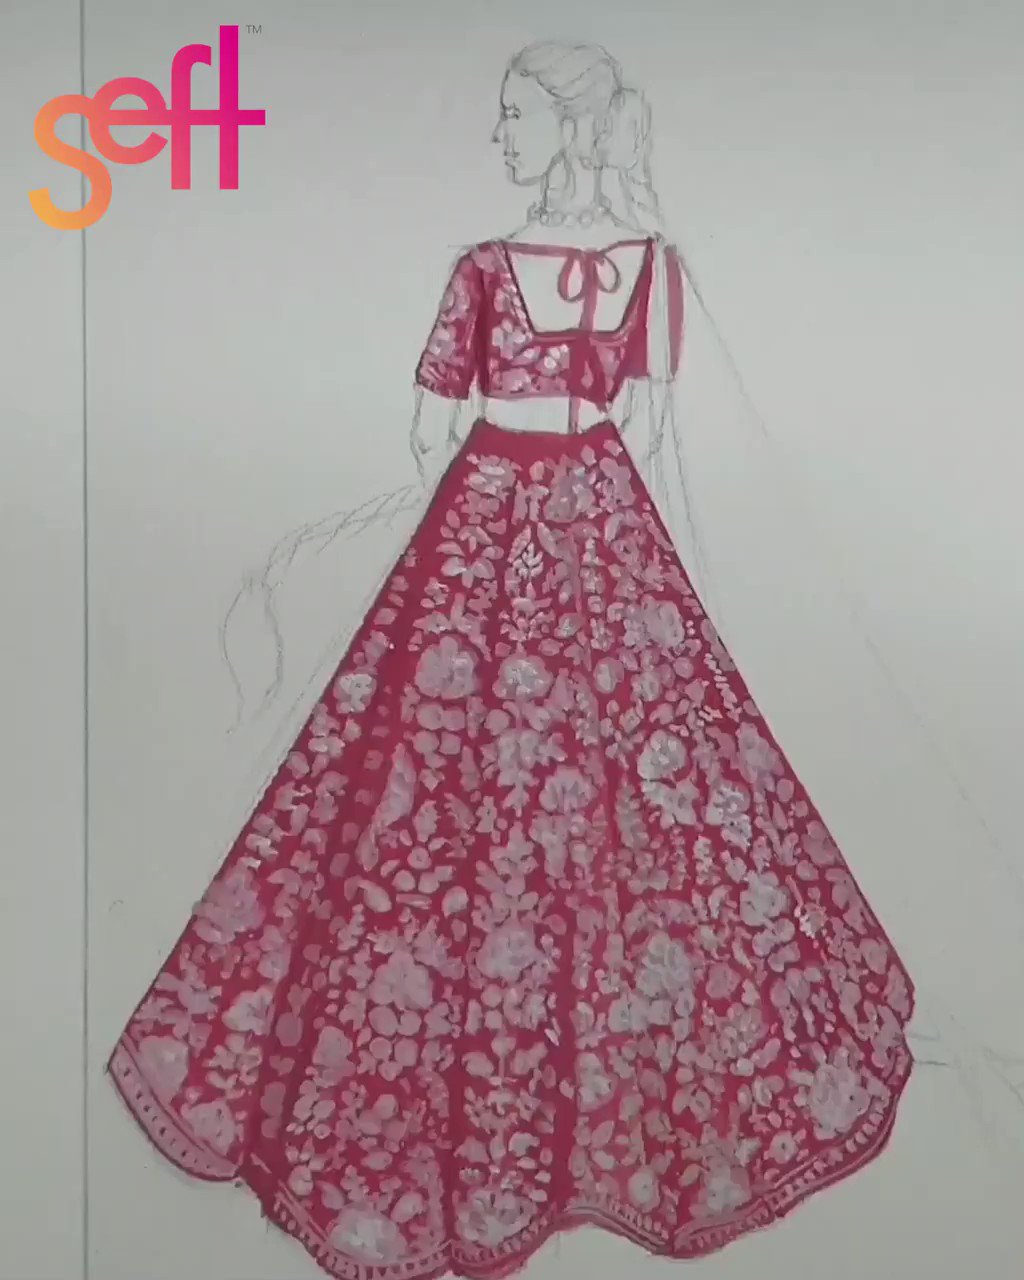 How to Draw a Bride in Lehenga ll Mandala art for Traditional Bride ll Girl  Drawings | Dress sketches, Fashion design sketch, Girl drawing